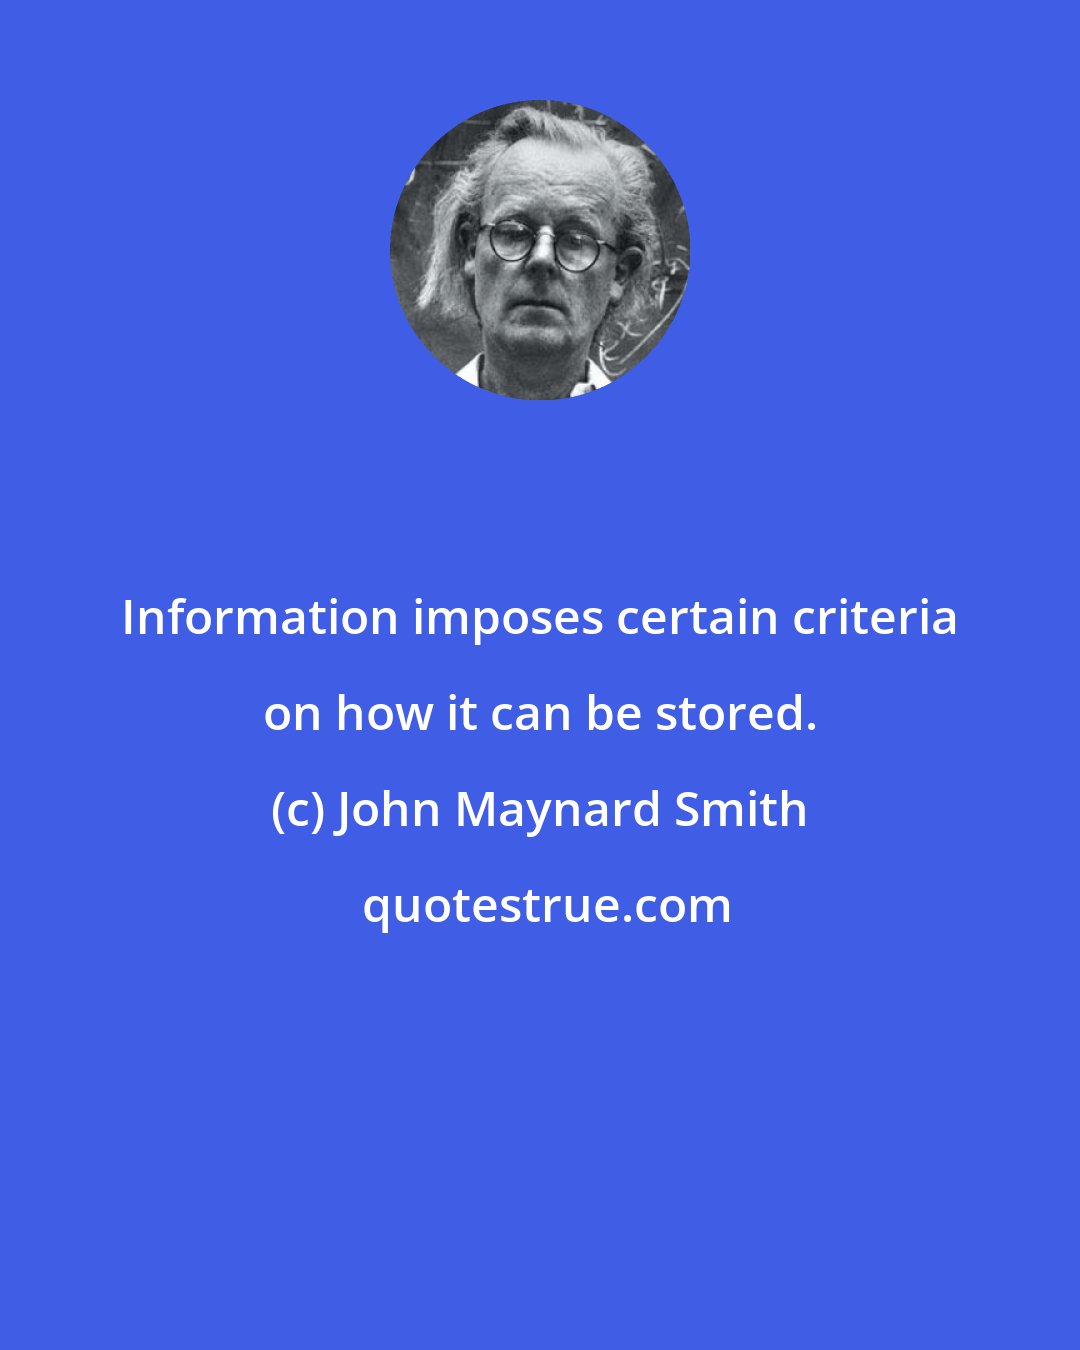 John Maynard Smith: Information imposes certain criteria on how it can be stored.